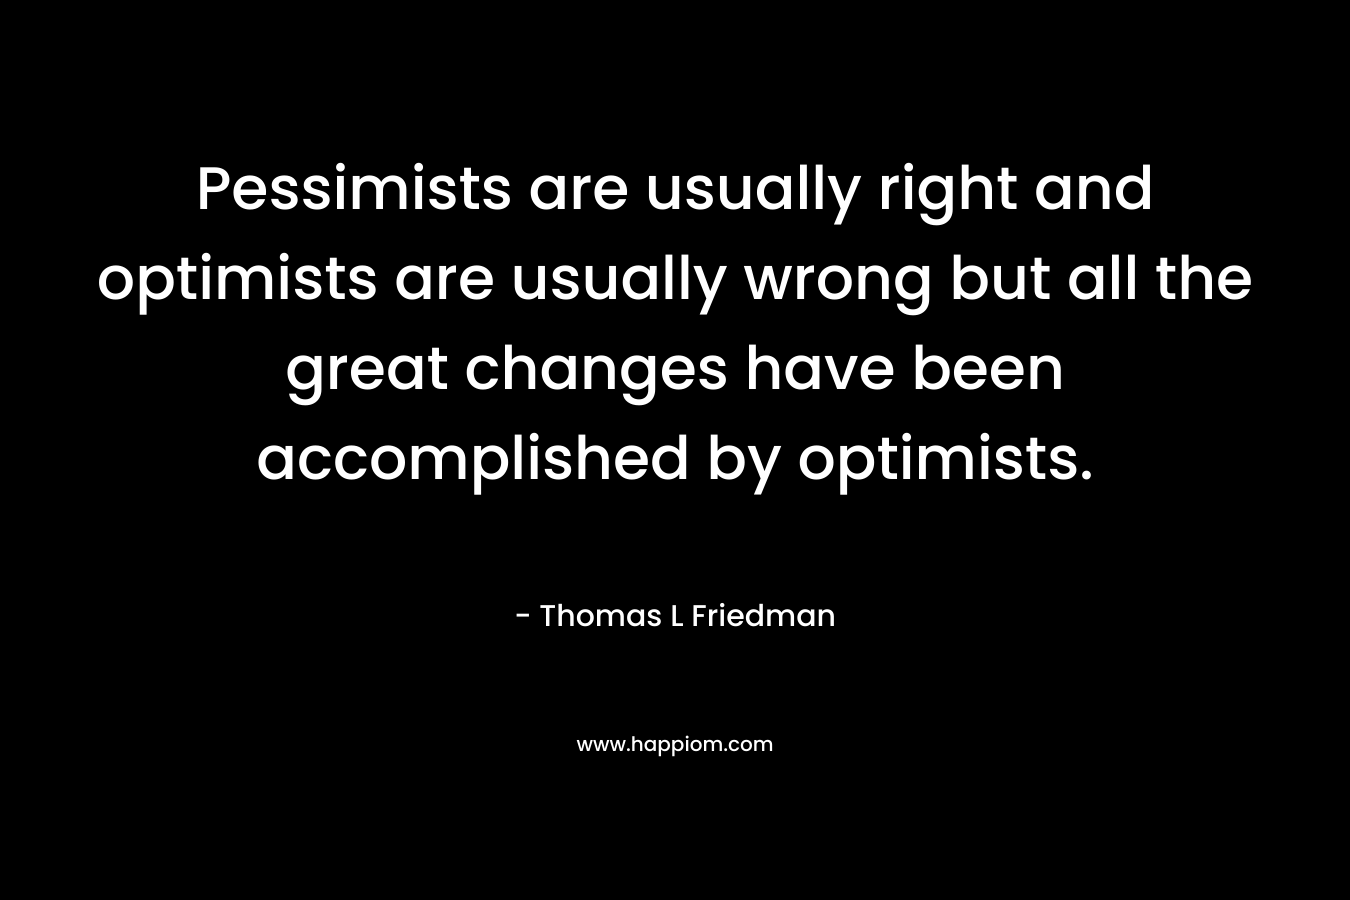 Pessimists are usually right and optimists are usually wrong but all the great changes have been accomplished by optimists.